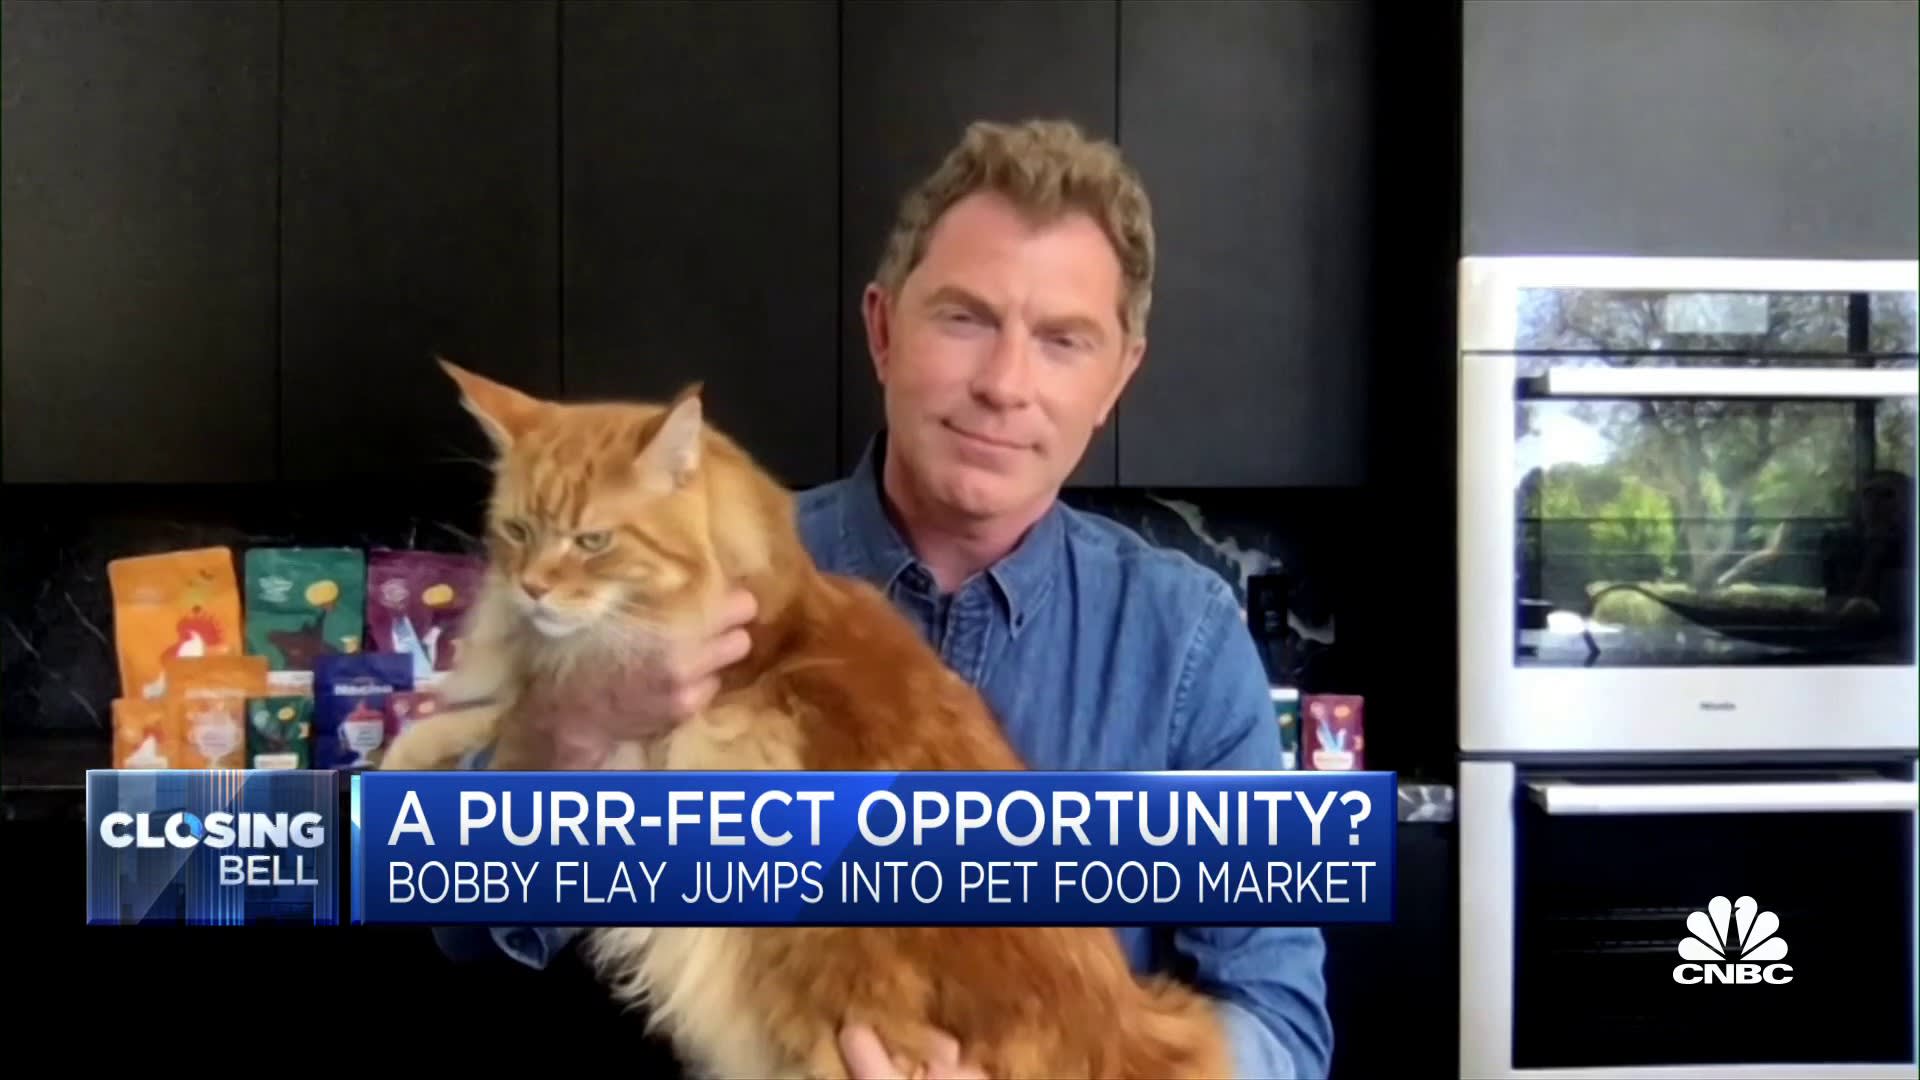 Chef Bobby Flay launches pet food line for cats